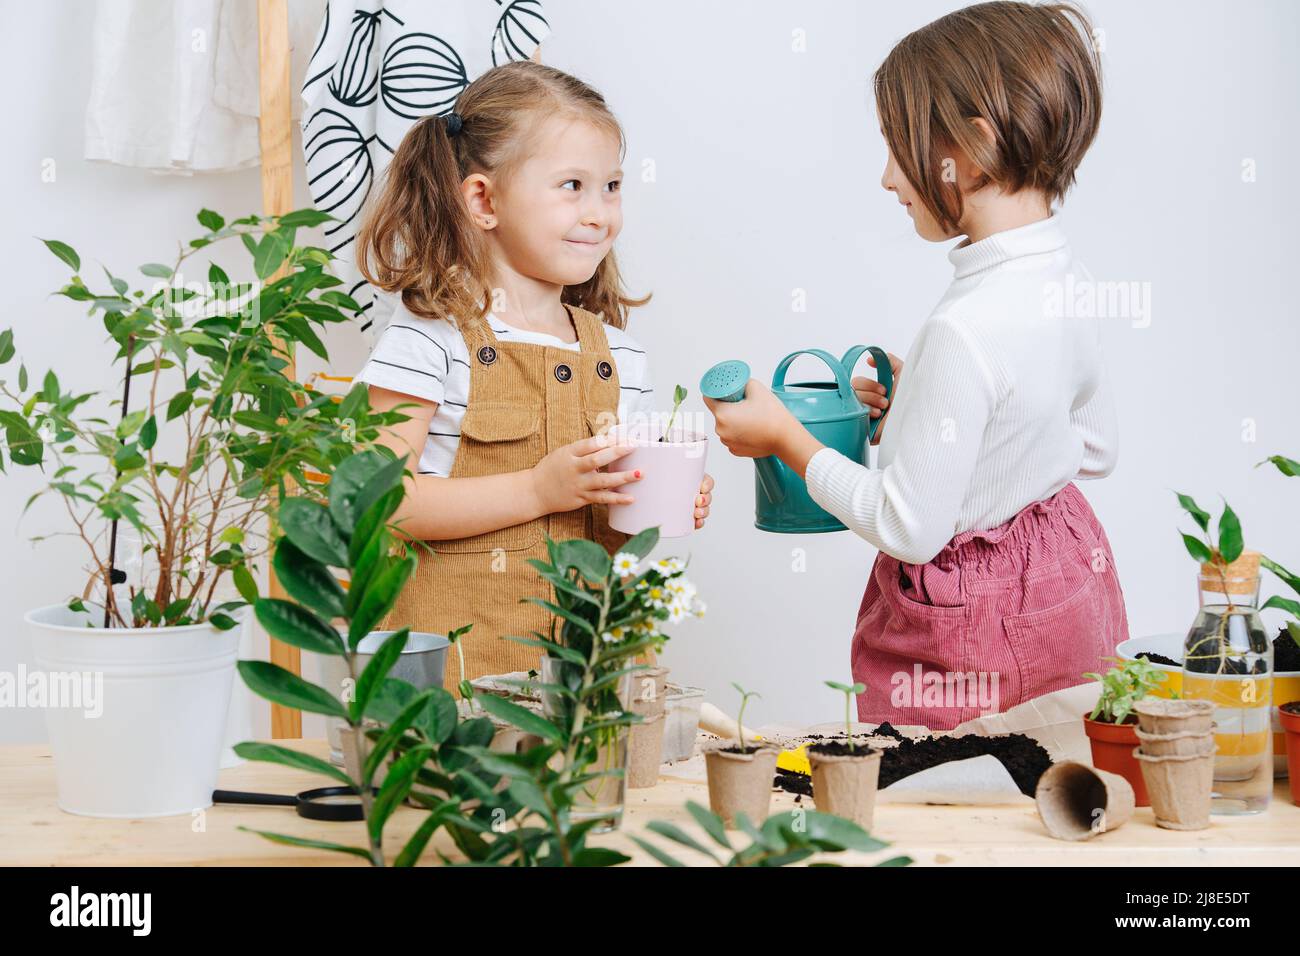 Cheeky girls watering a seedling in a cup together, looking at each other. Next to other plants, soil and containers on a planting table. Stock Photo